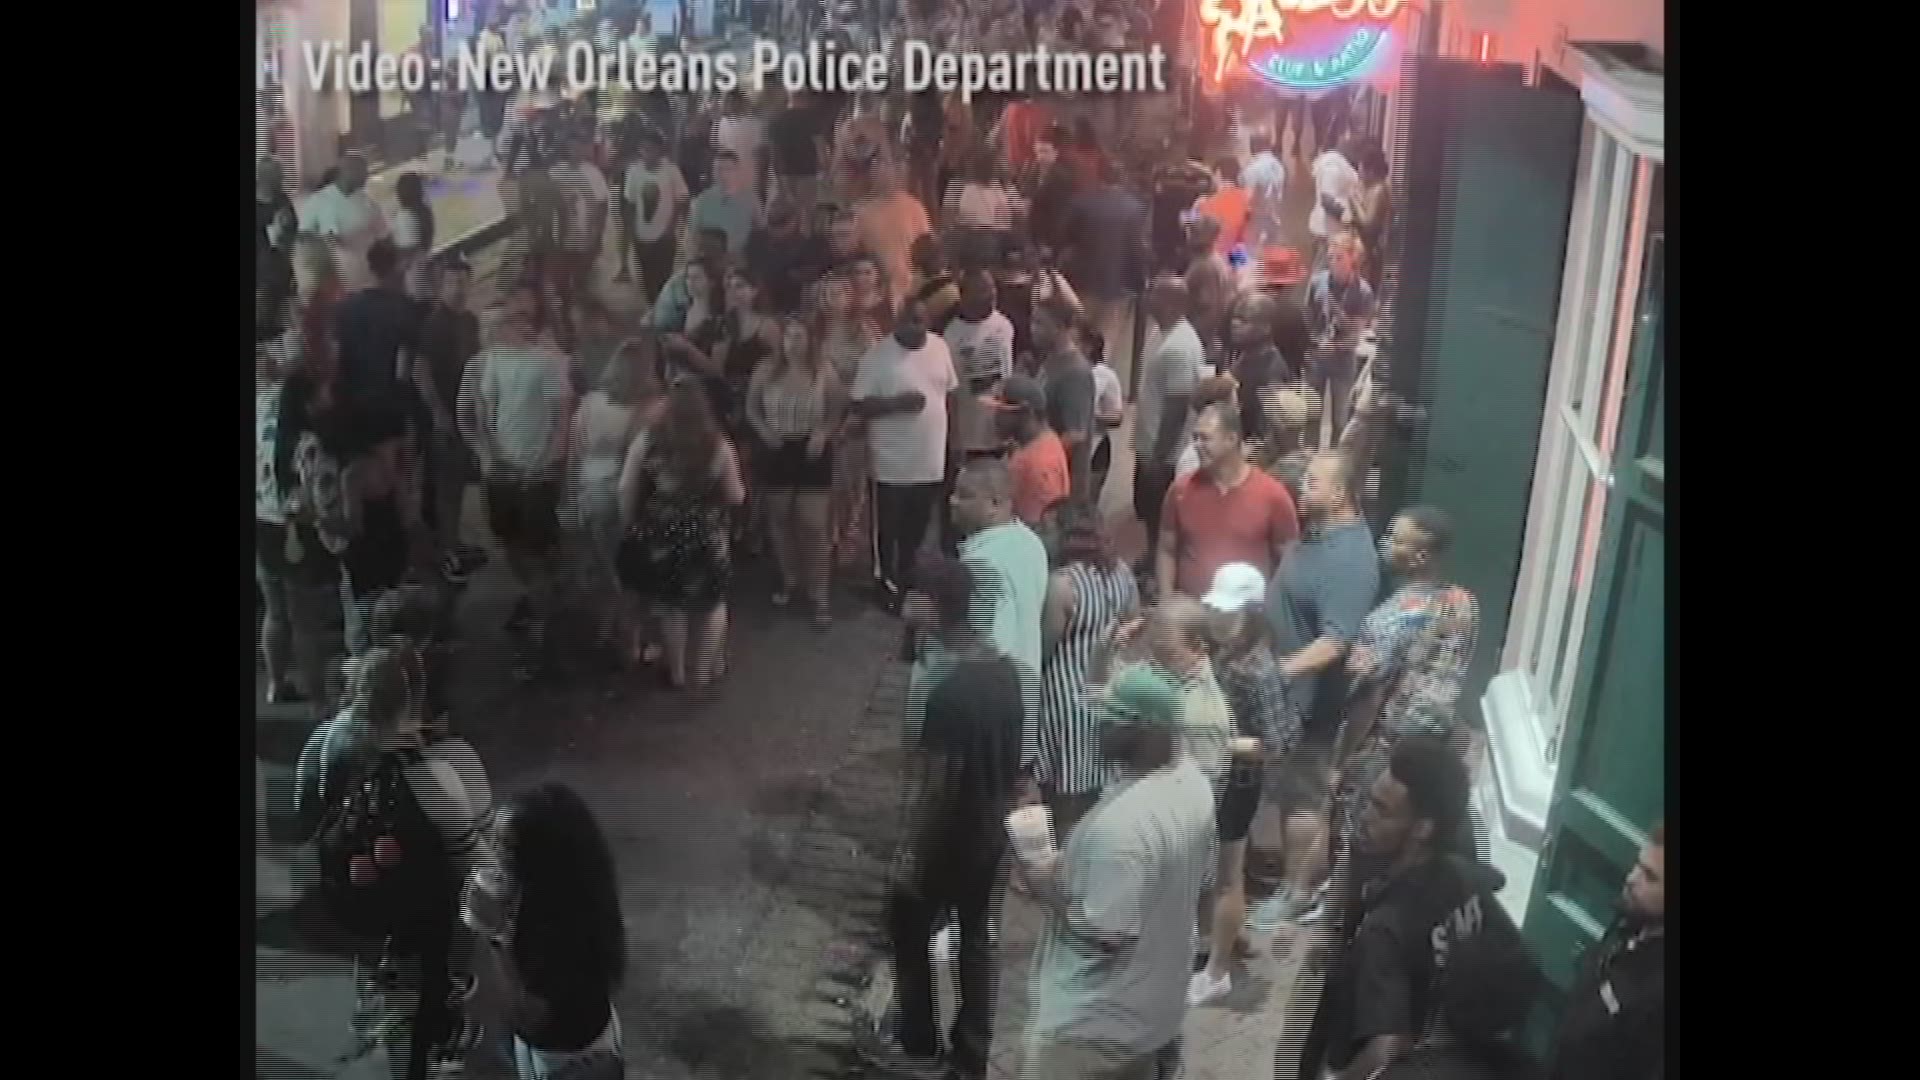 The brawl ended in five arrests and two NOPD officers injured.